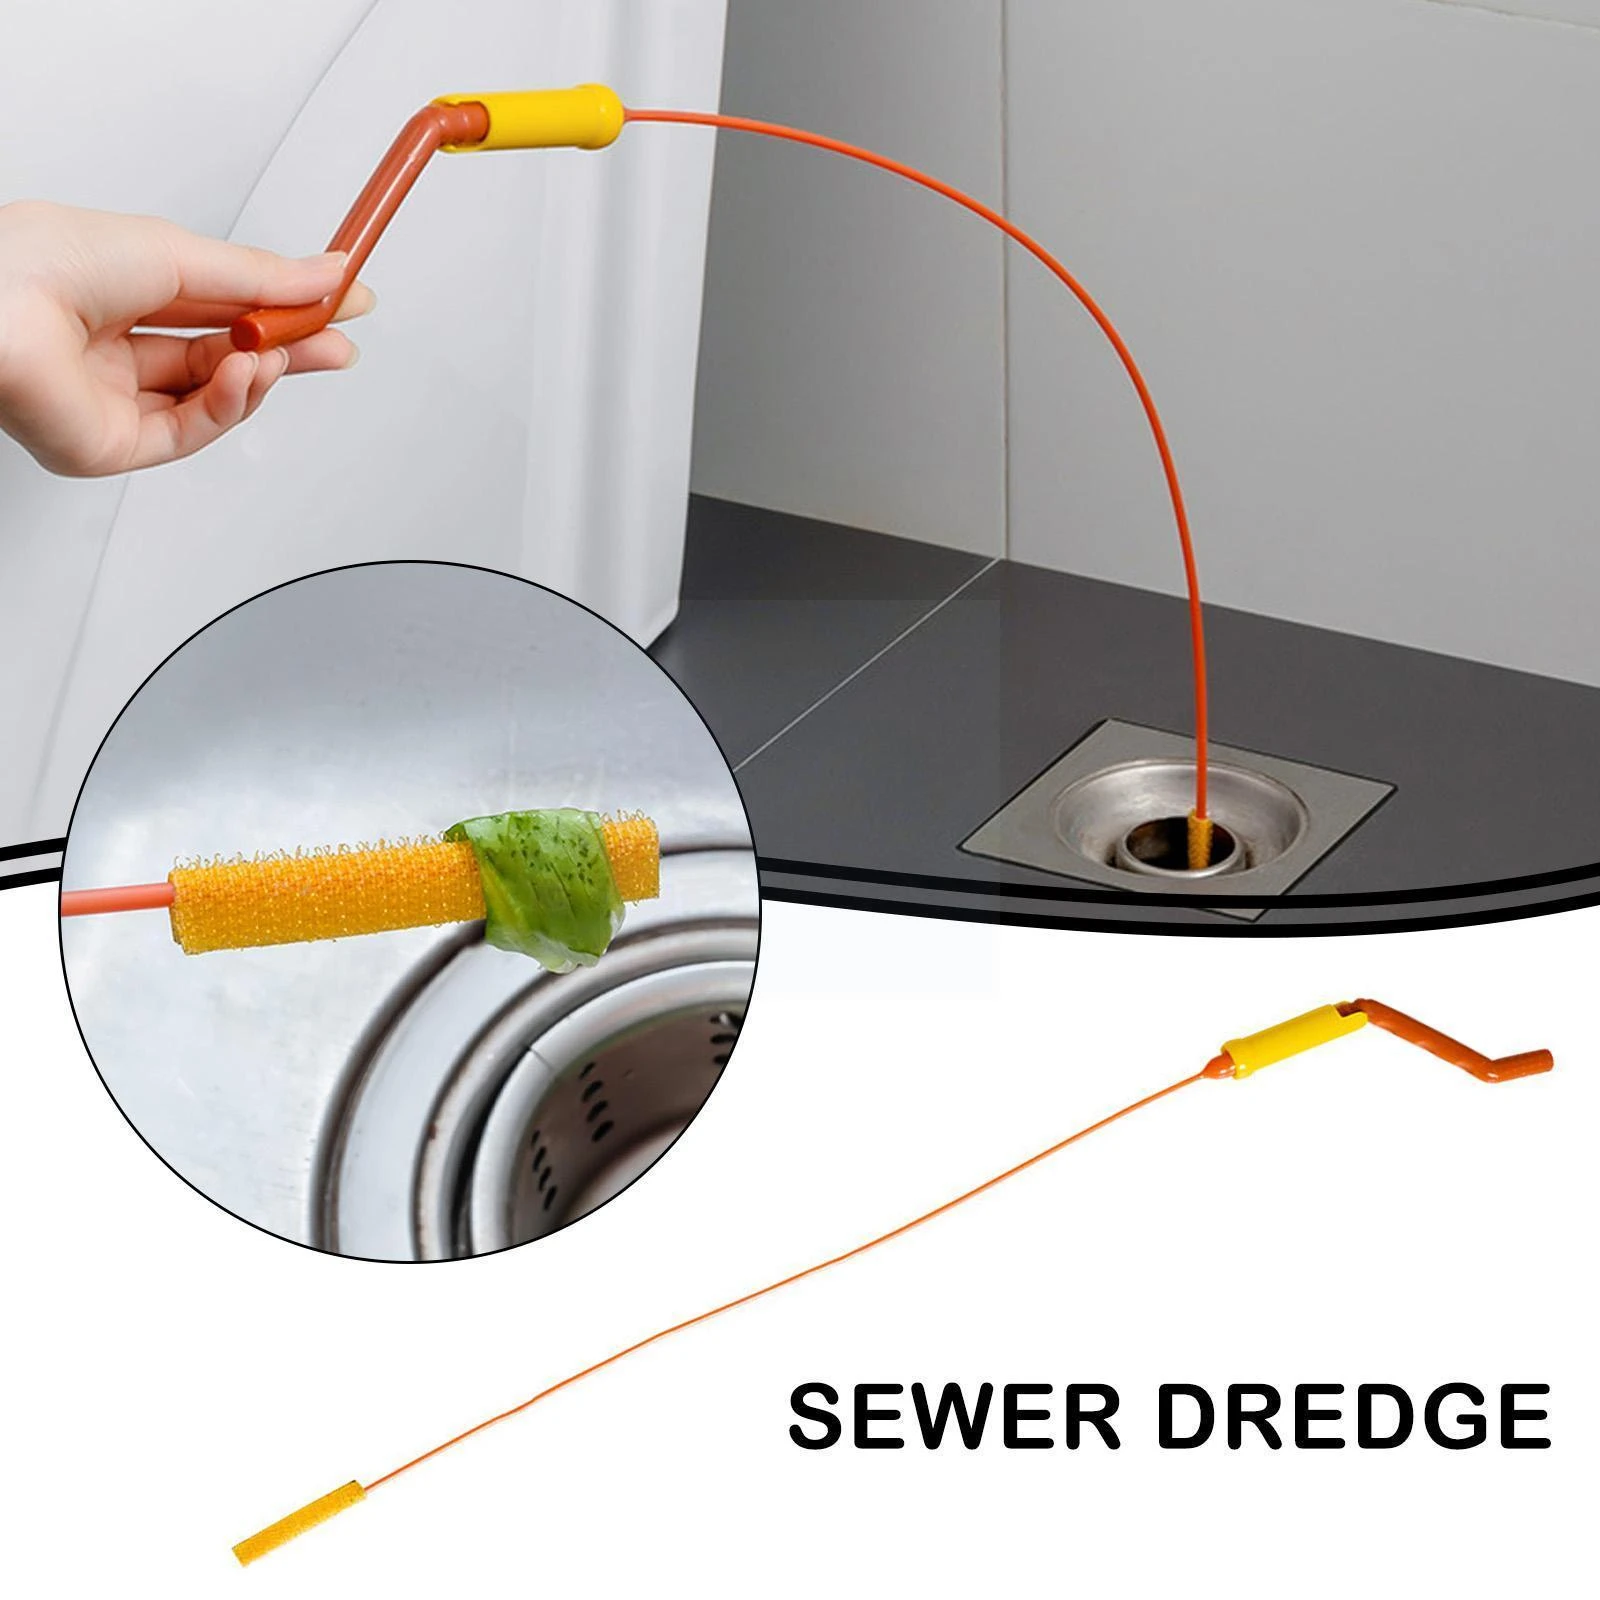 Flexisnake Drain Weasel Sink Snake Cleaner Drain Hair Clog Tool Remover  With Drain Handle Rotating Facility Drainage J3k7 - Cleaning Brushes -  AliExpress